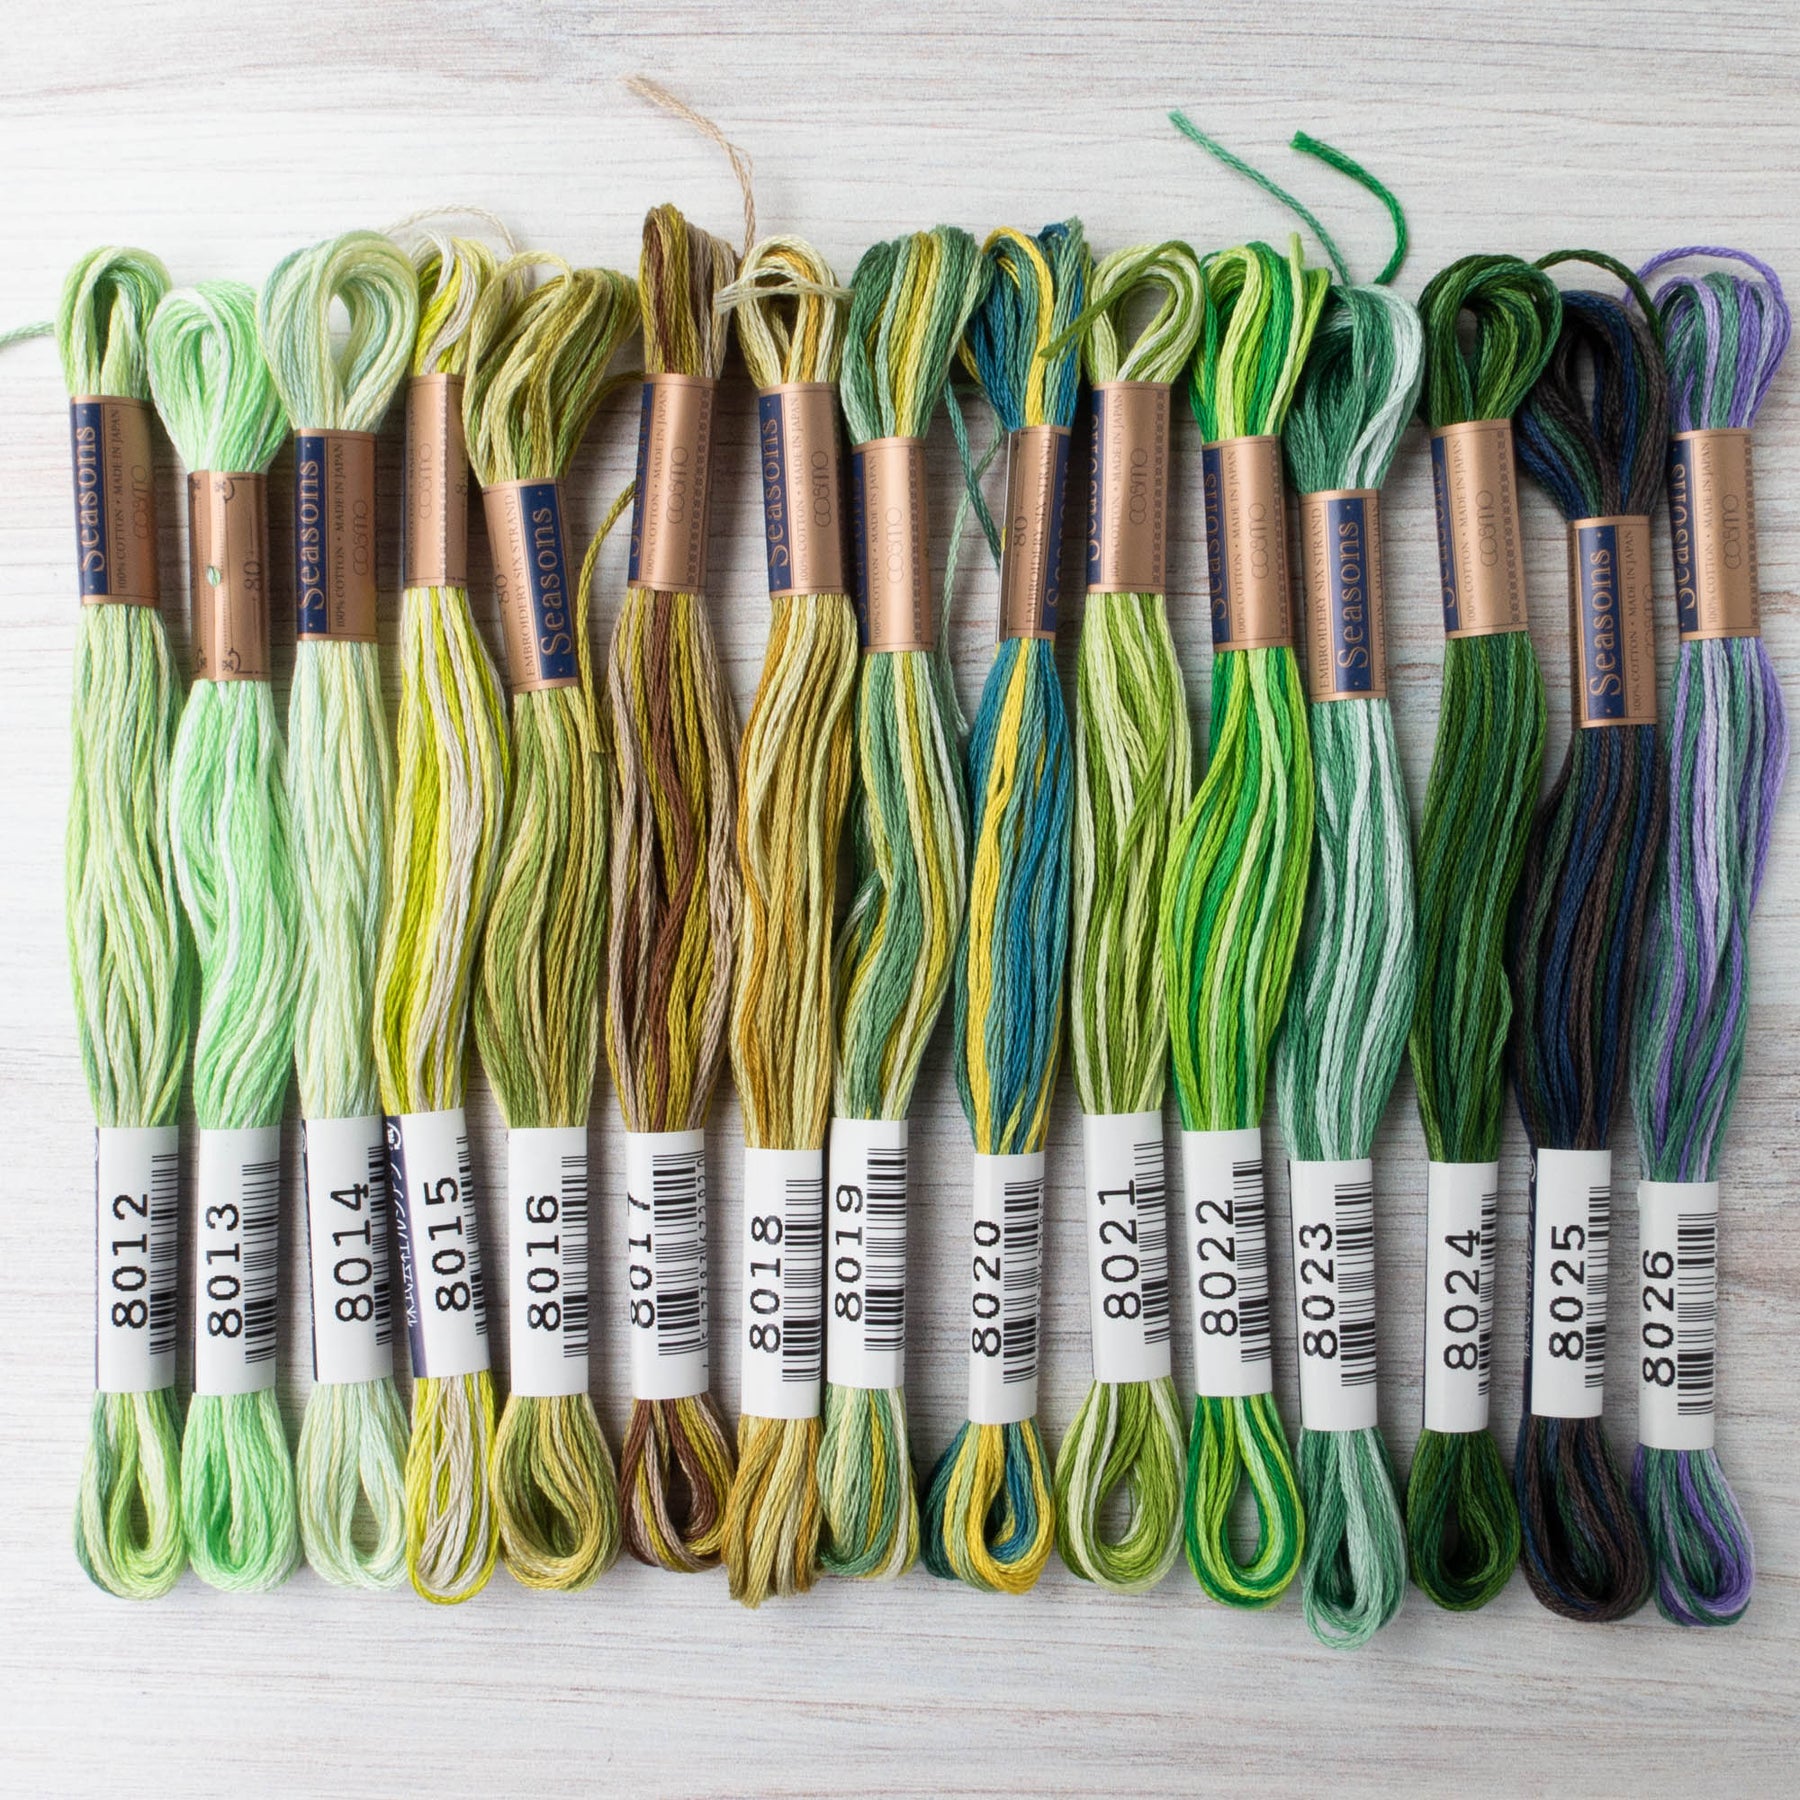 Arteza Embroidery Floss, Variegated Colors - 80 Pieces : Target